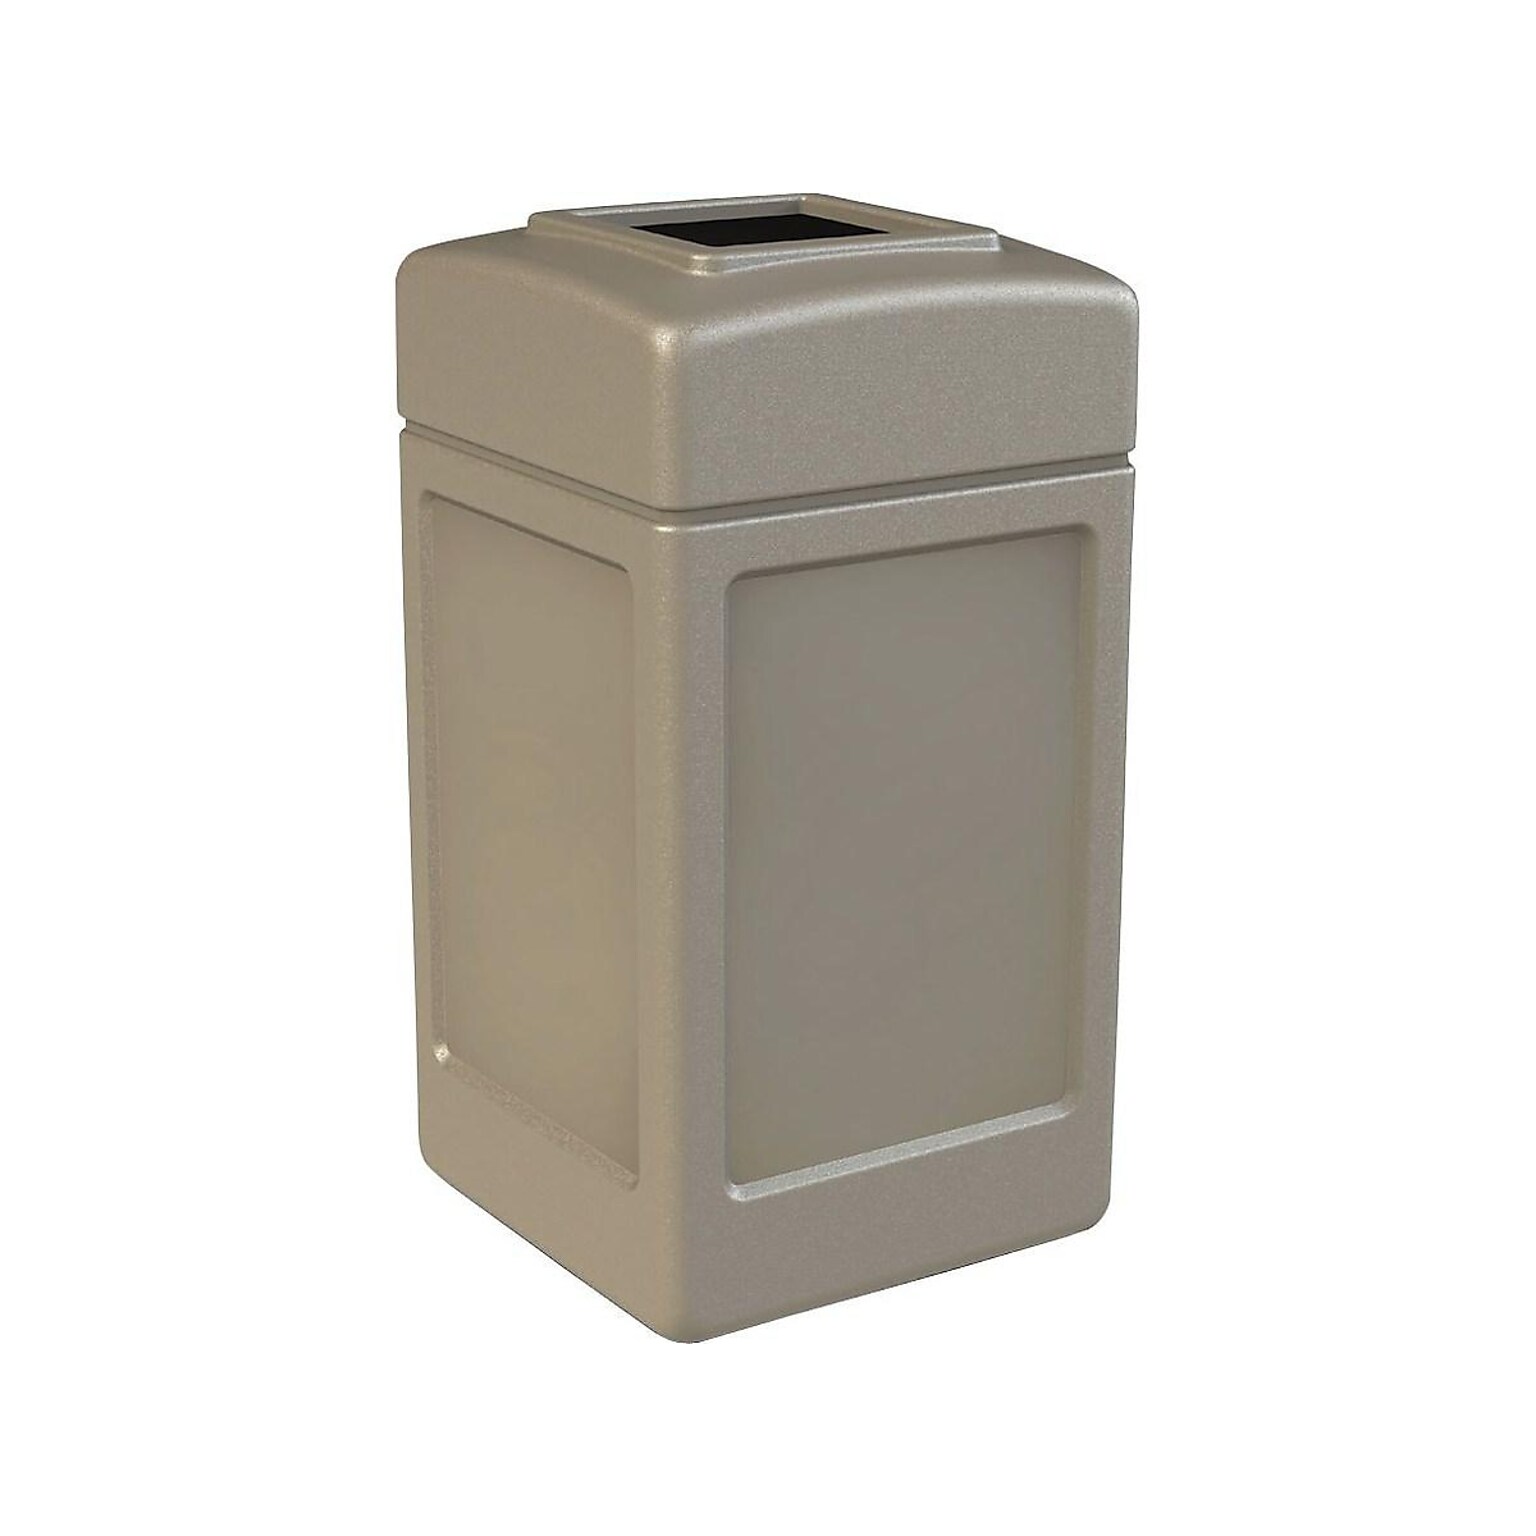 Commercial Zone PolyTec Indoor/Outdoor Trash Can w/ No Lid, Beige Polyethylene, 42 Gal. (732102)